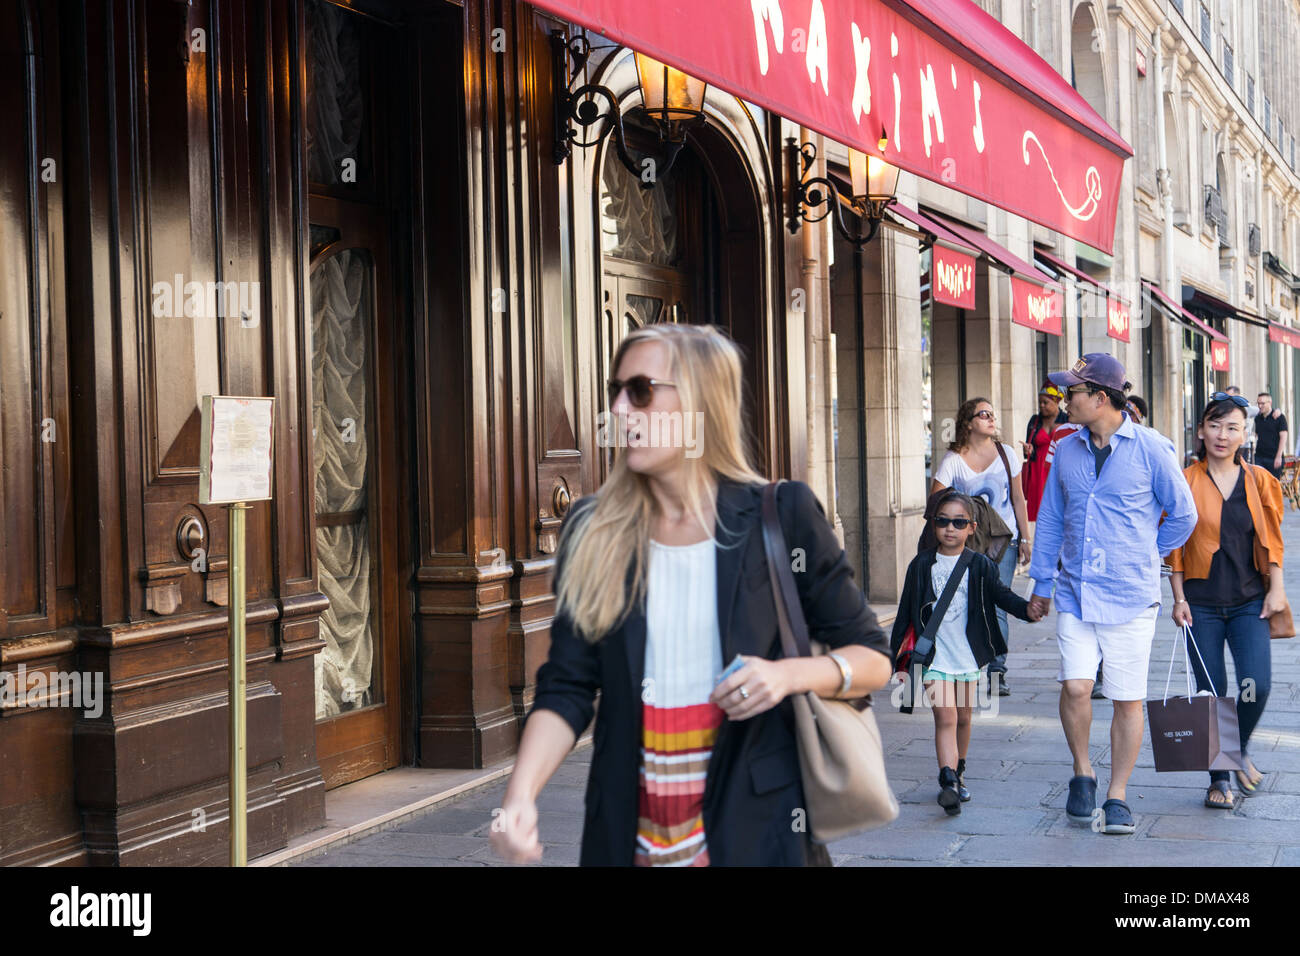 PASSER-BY IN FRONT OF THE FACADE OF THE RESTAURANT AND MUSEUM MAXIM'S, RUE ROYALE, PARIS (75), FRANCE Stock Photo